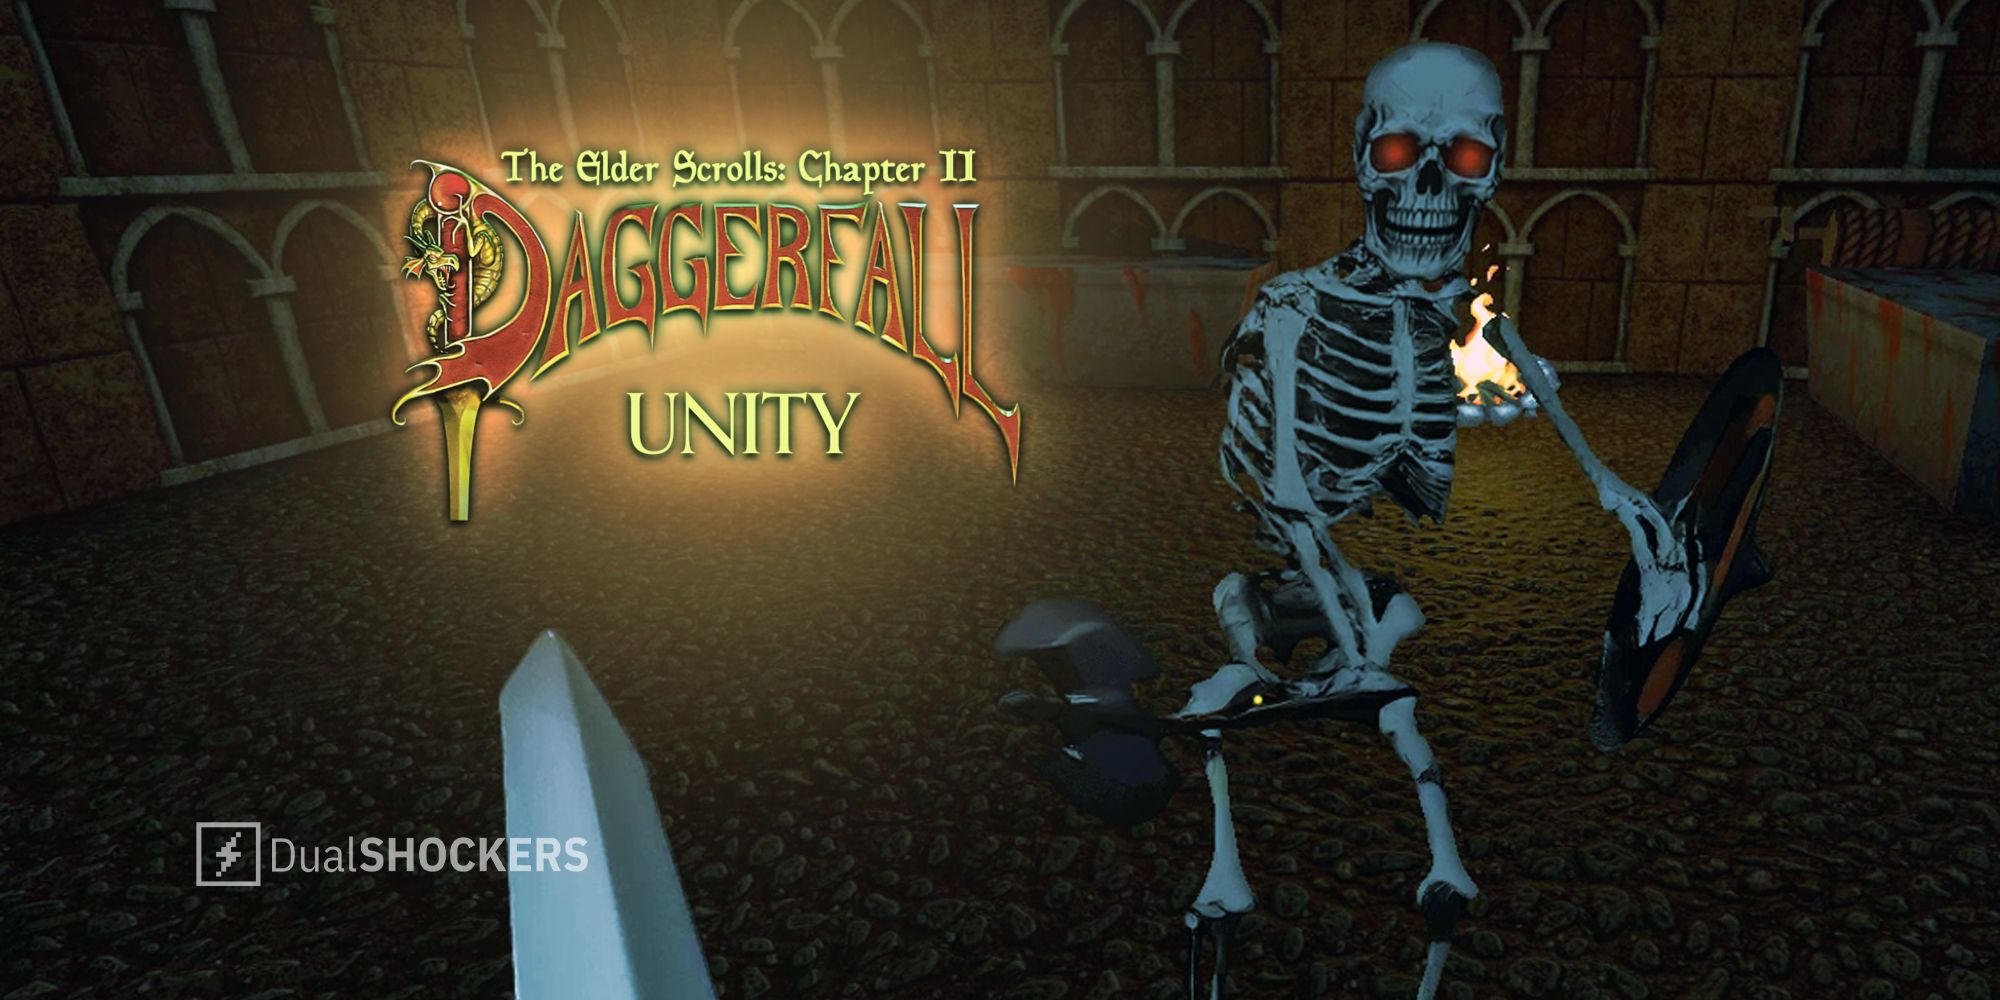 Daggerfall Unity skeleton in a dungeon